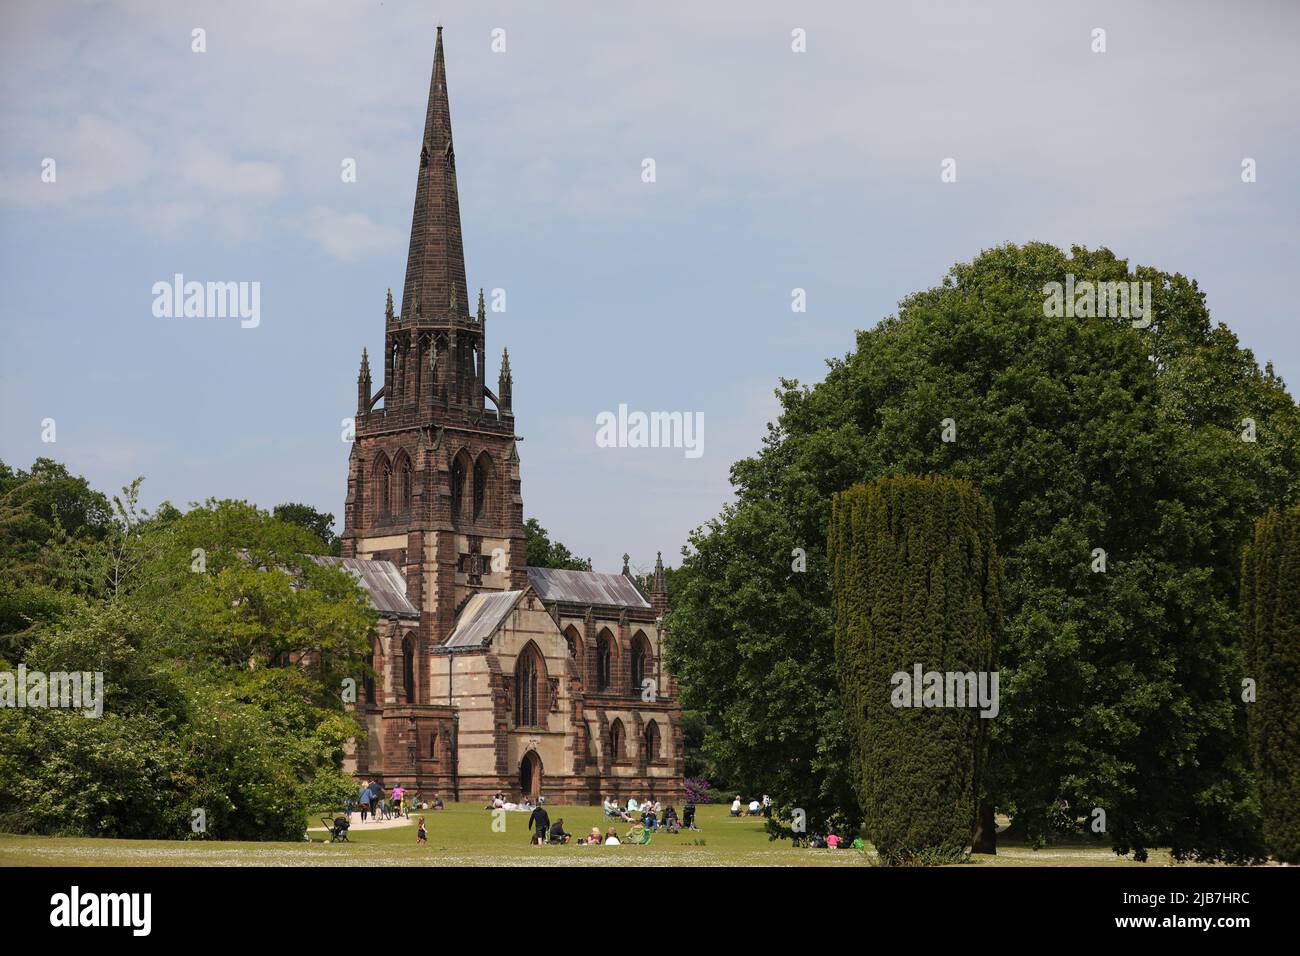 UK. 03rd June, 2022. WORKSOP, ENGLAND. JUNE 3RD 2022. The bell in Chapel of Saint Mary the Virgin was rung 70 times from 10.55 to mark Her MajestyÕs Platinum Jubilee during the Queen Elizabeth II Platinum Jubilee Celebrations at Clumber Park, Worksop. Credit: james holyoak/Alamy Live News Stock Photo